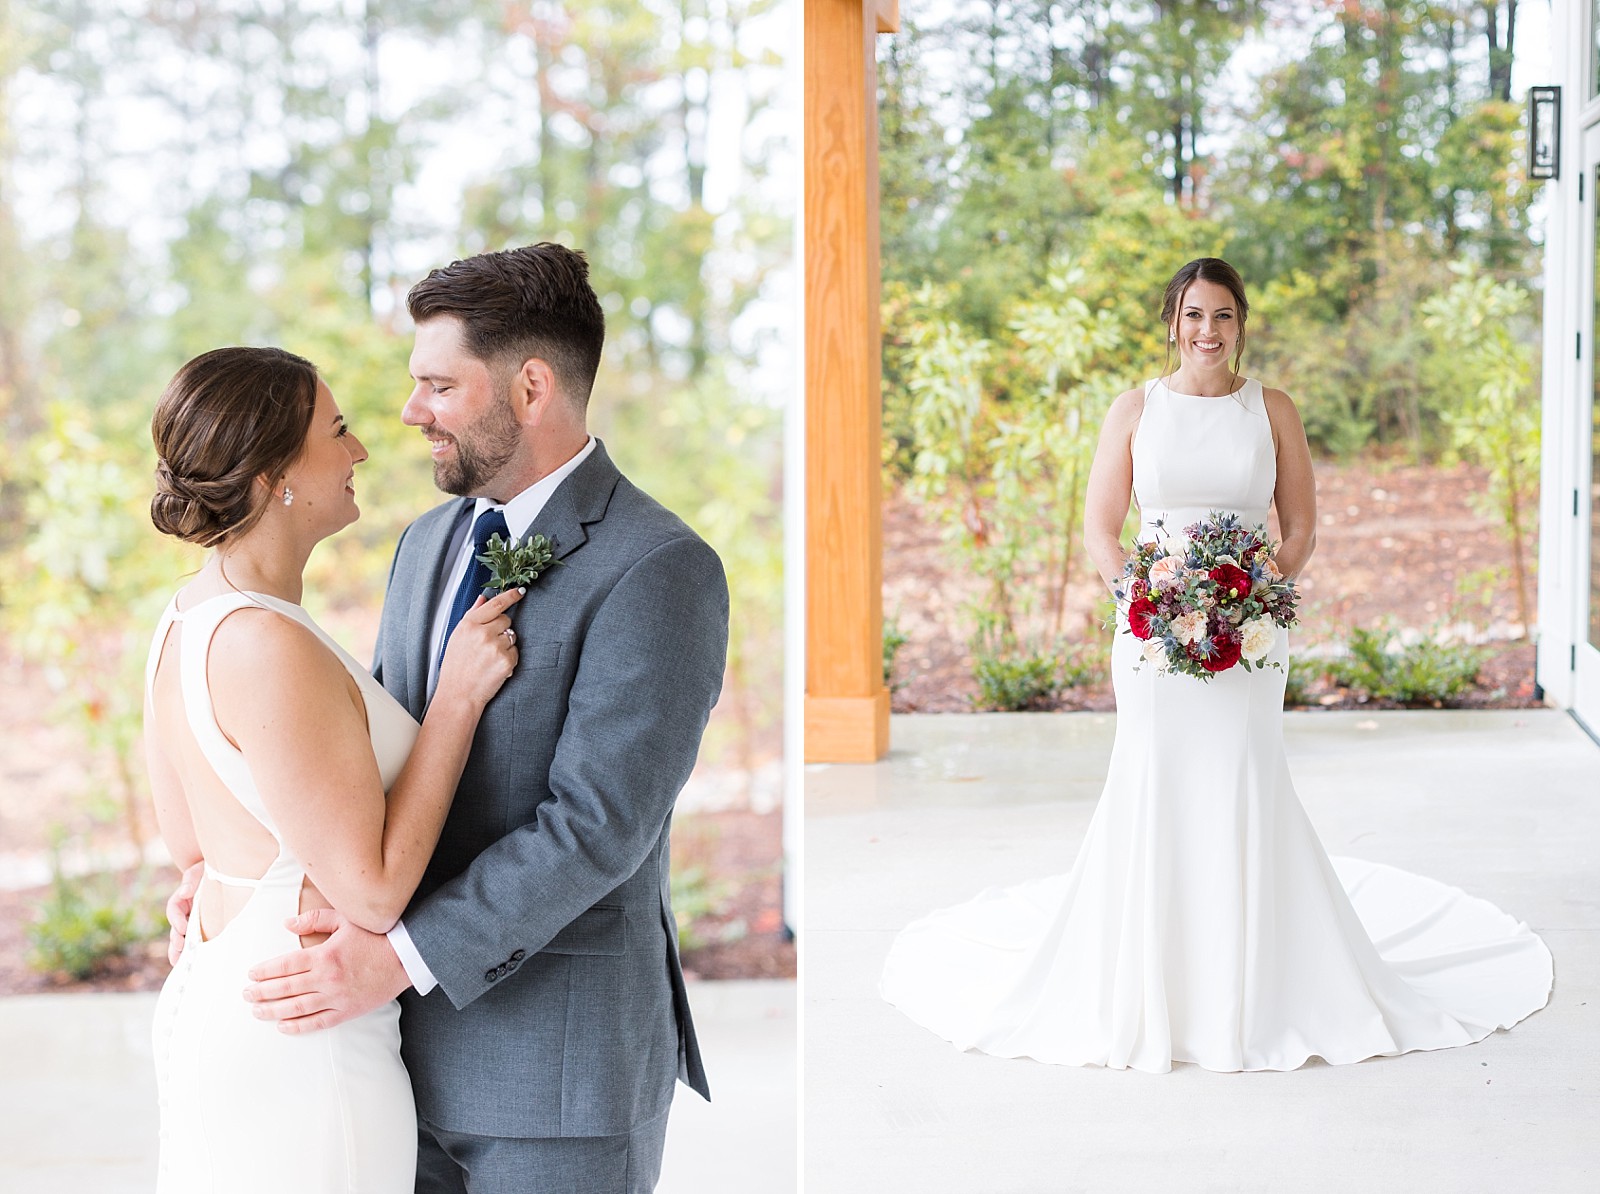 Bride and groom |The Upchurch in Cary NC | Raleigh NC Wedding Photography